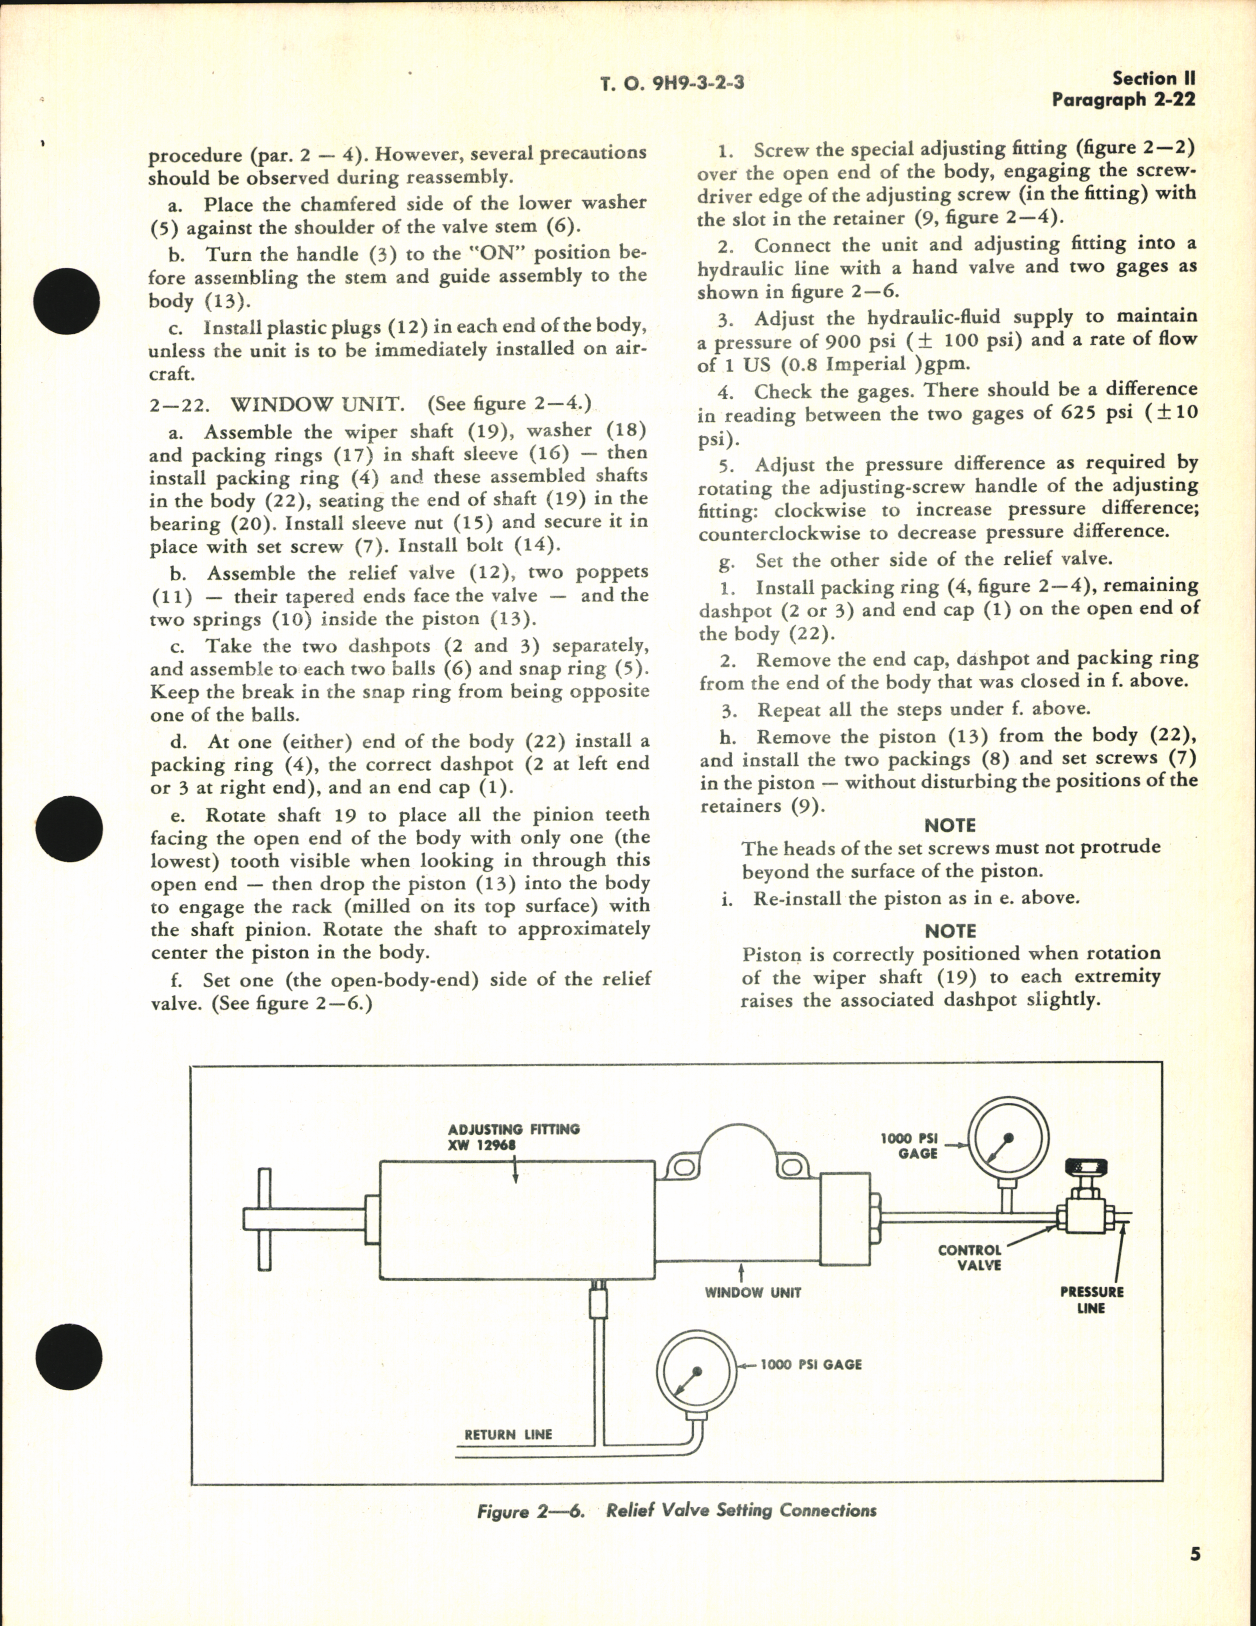 Sample page 7 from AirCorps Library document: Handbook of Overhaul Instructions for Hydraulic Windshield Wipers 